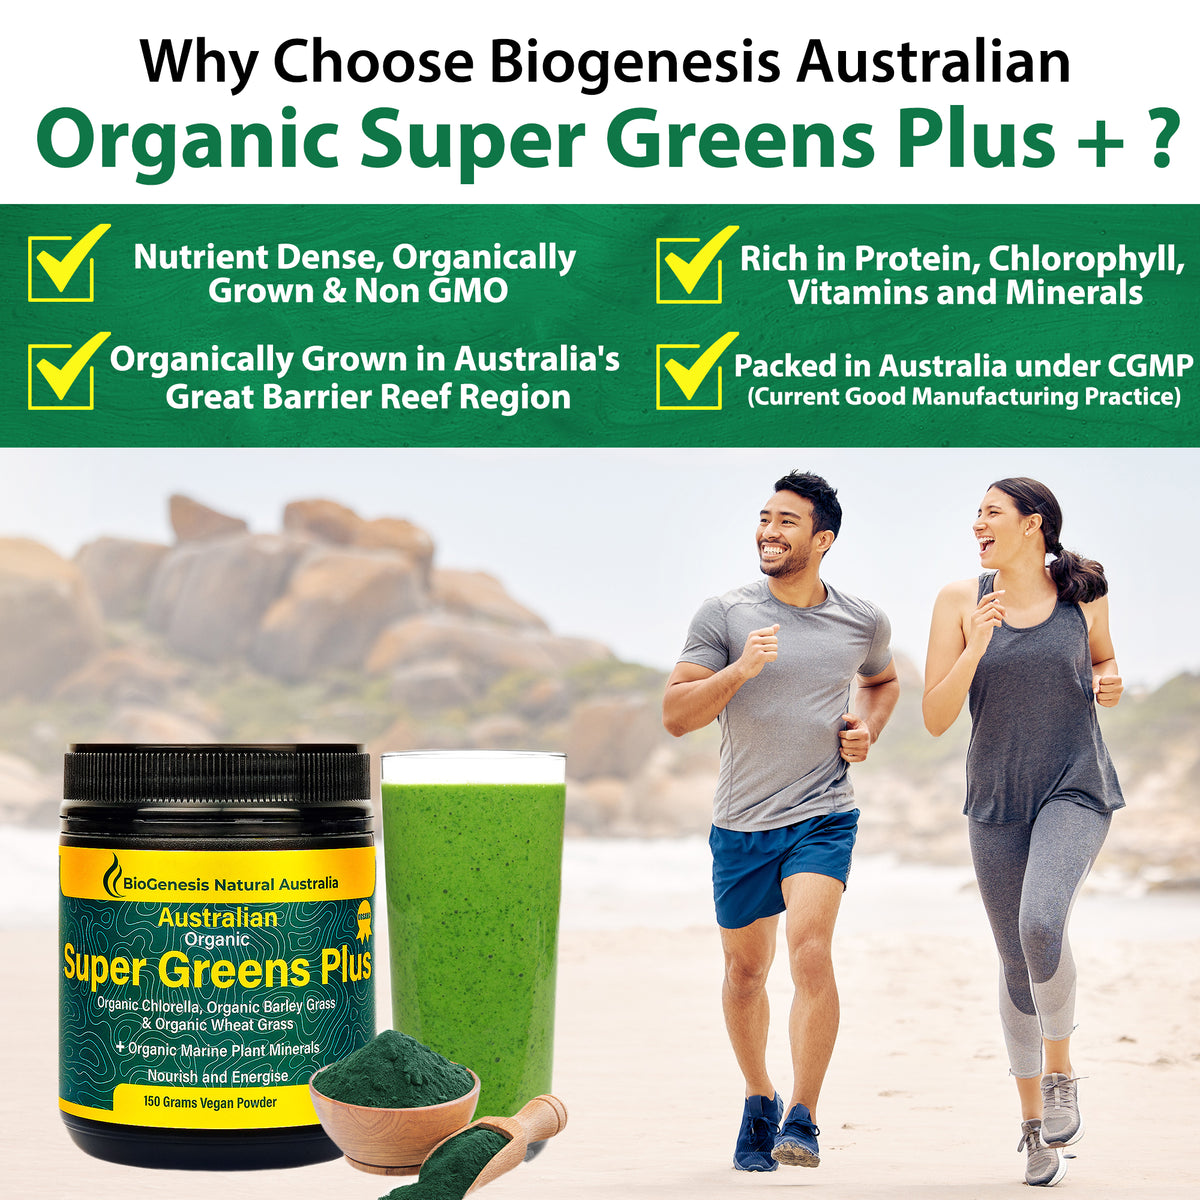 Benefits of Supergreens Plus: nutrient dense, organically grown in Australia's great barrier reef region & non GMO; rich in protein, chlorophyll, vitamins and minerals; packed in Australia under CGMP